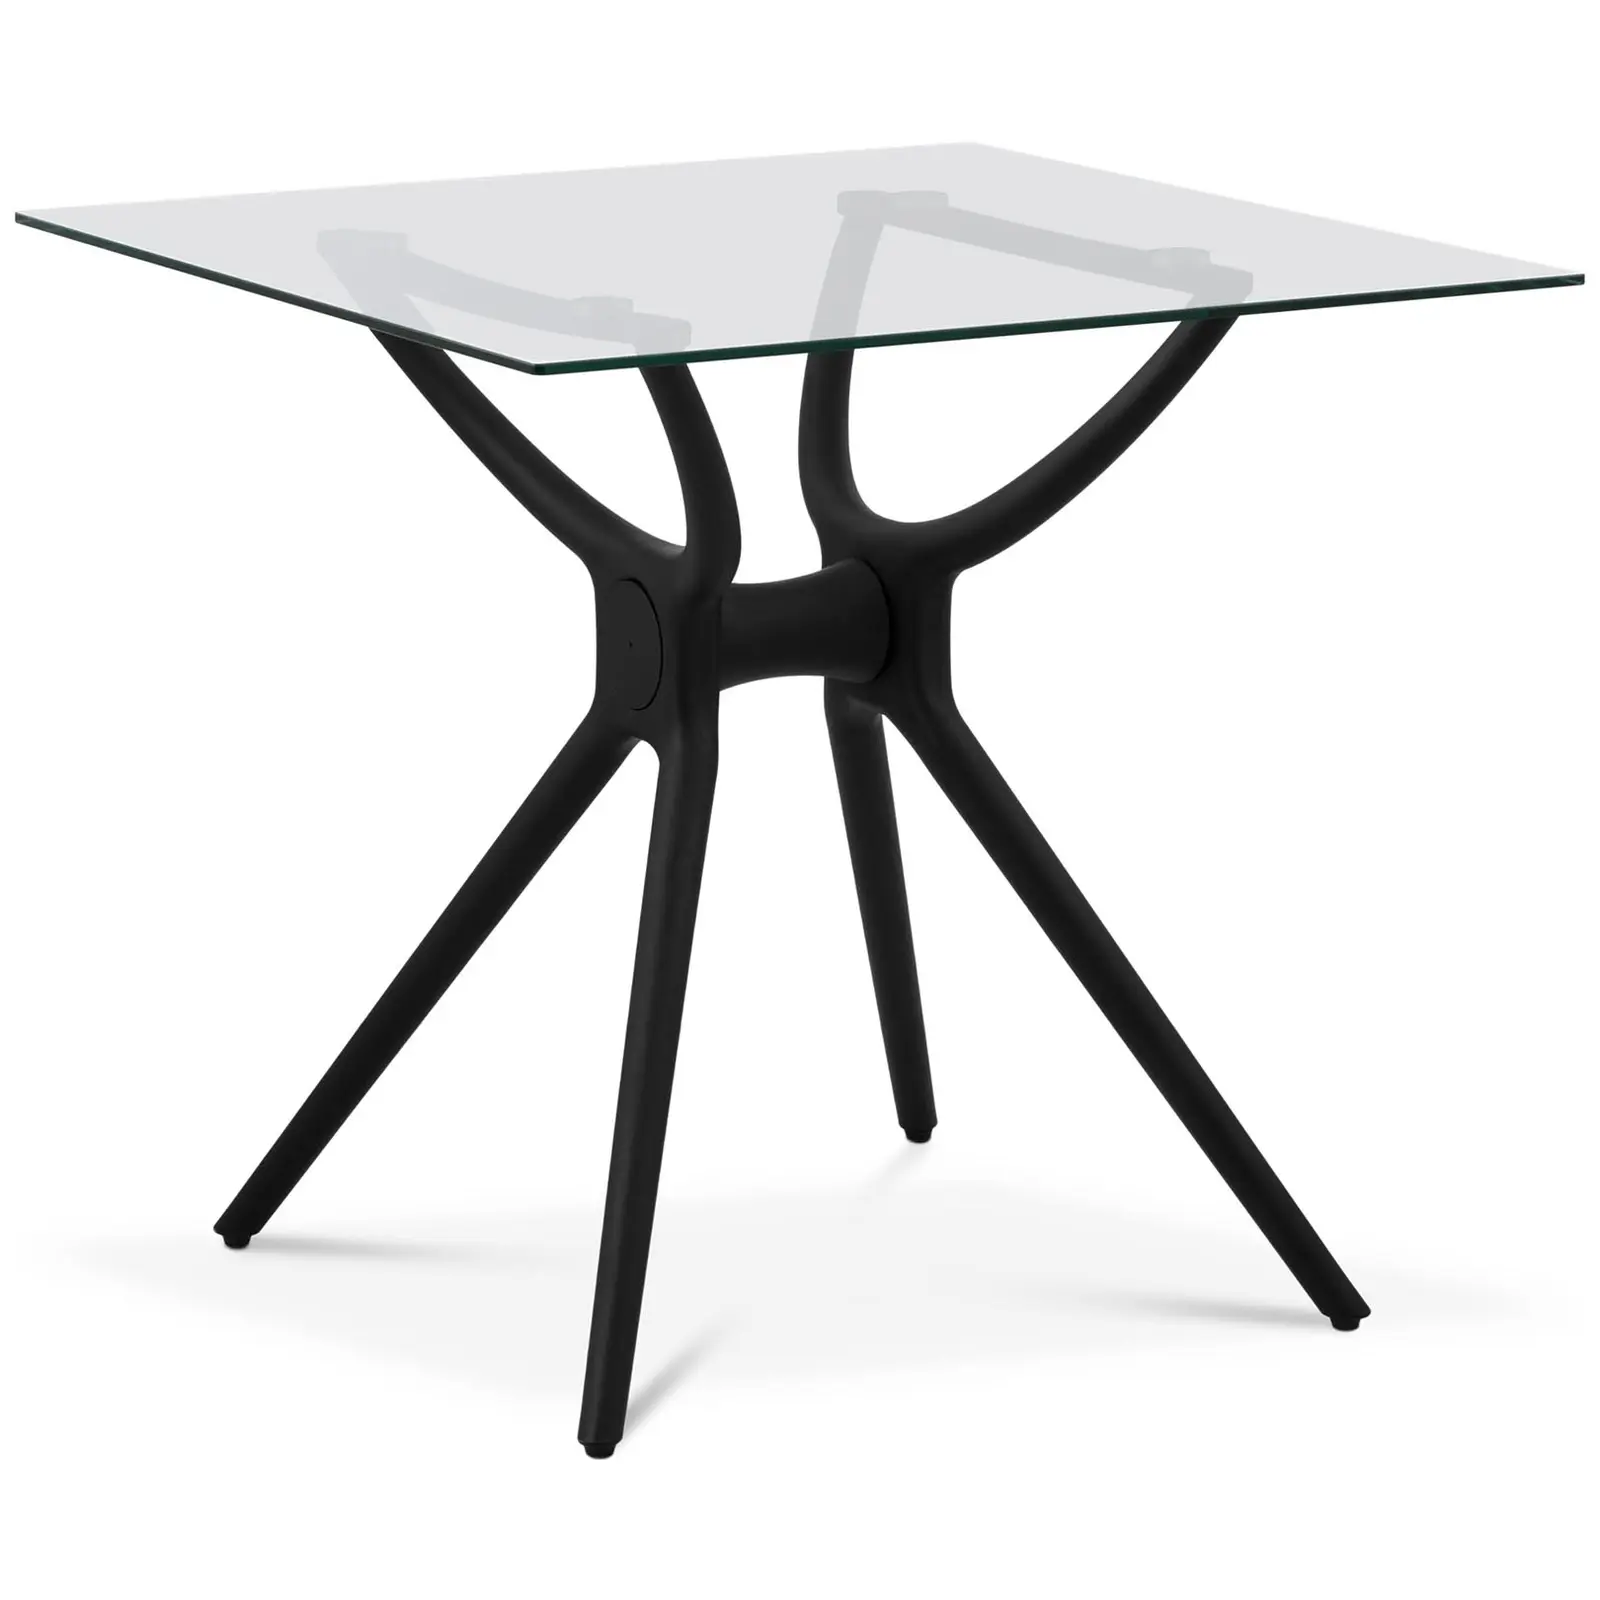 Table - square - 80 x 80 cm - glass top